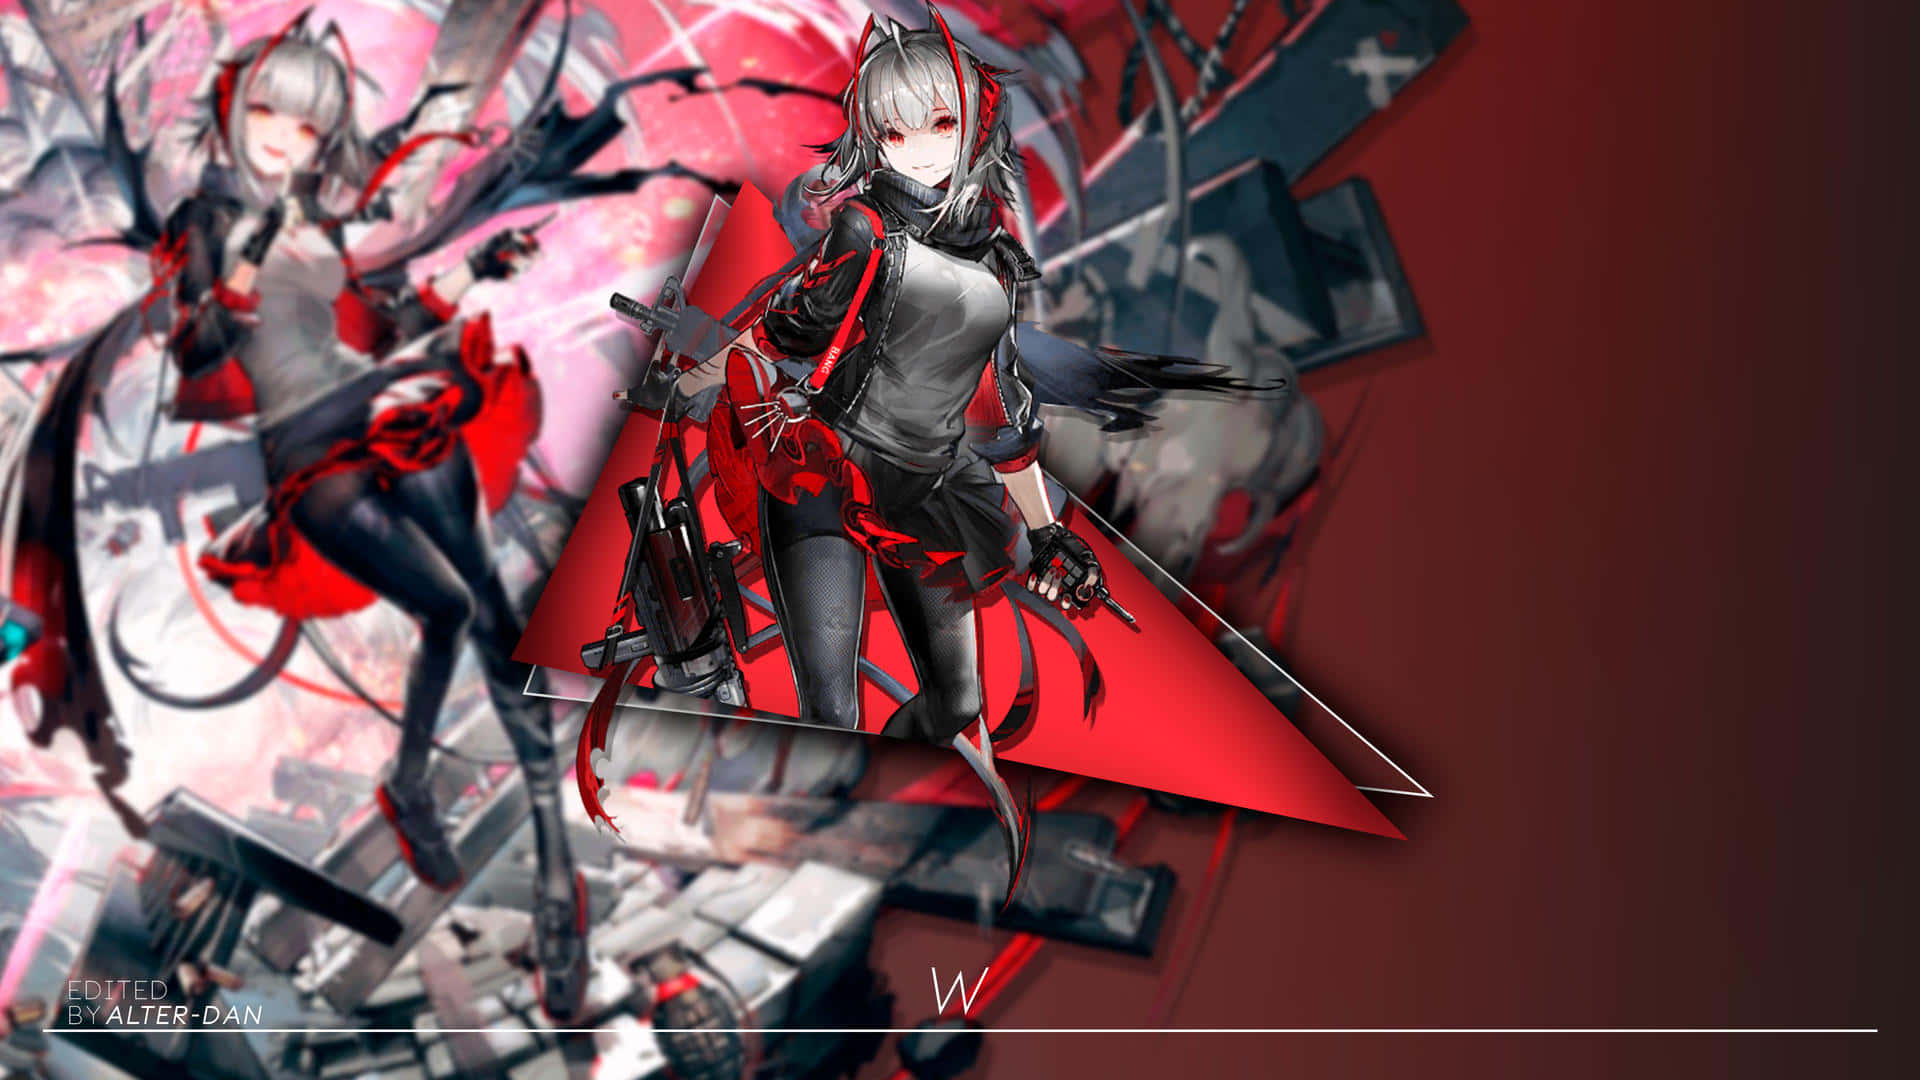 Join the Résistance in "Arknights"! Wallpaper